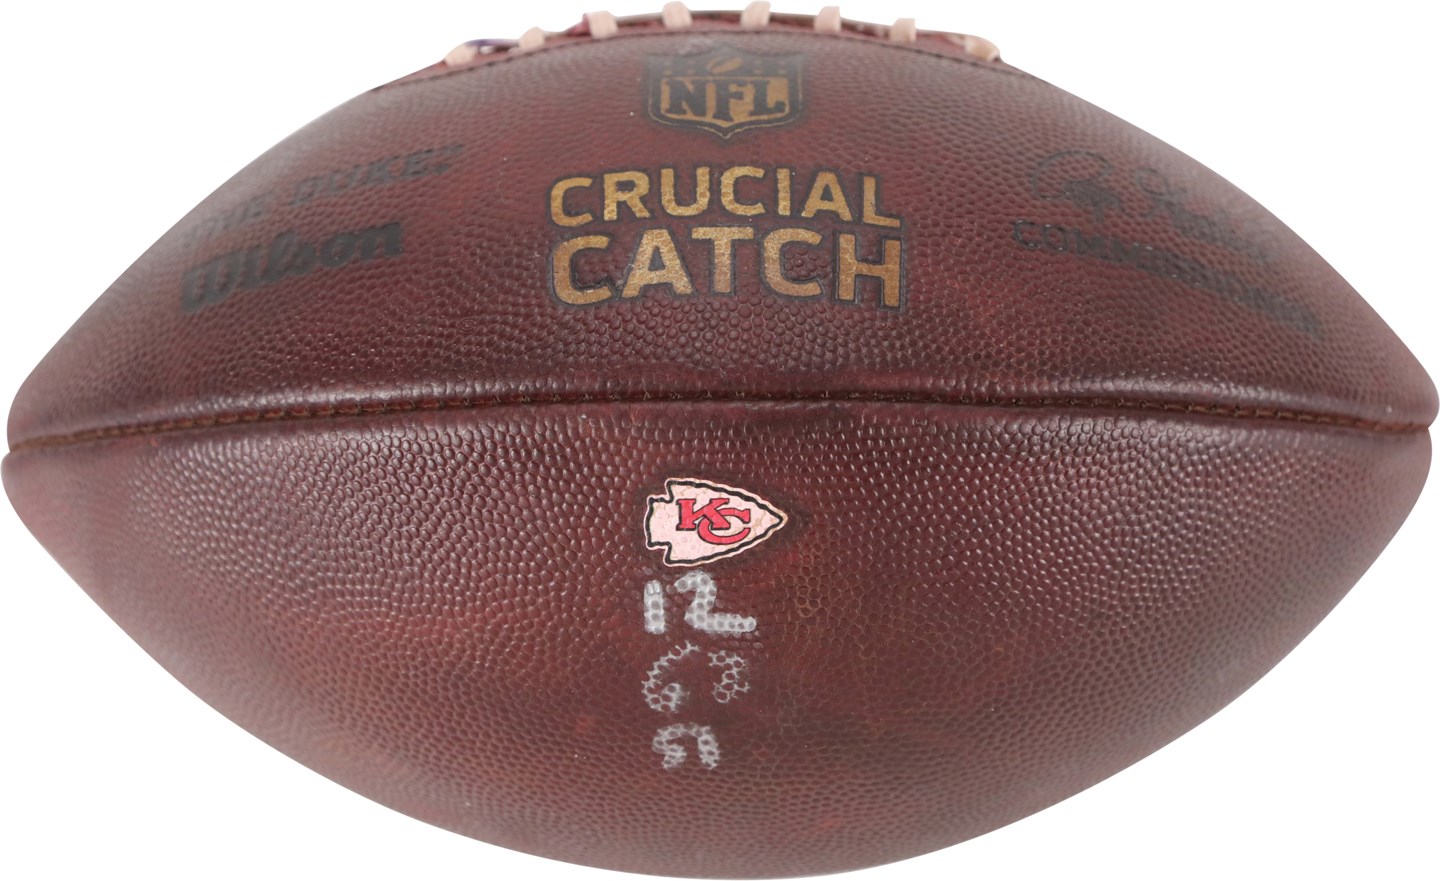 - 2017 James Harrison Game Used Football from Last Sack as a Pittsburgh Steeler - Sets Steelers All-Time Record! (ex-James Harrison Collection)